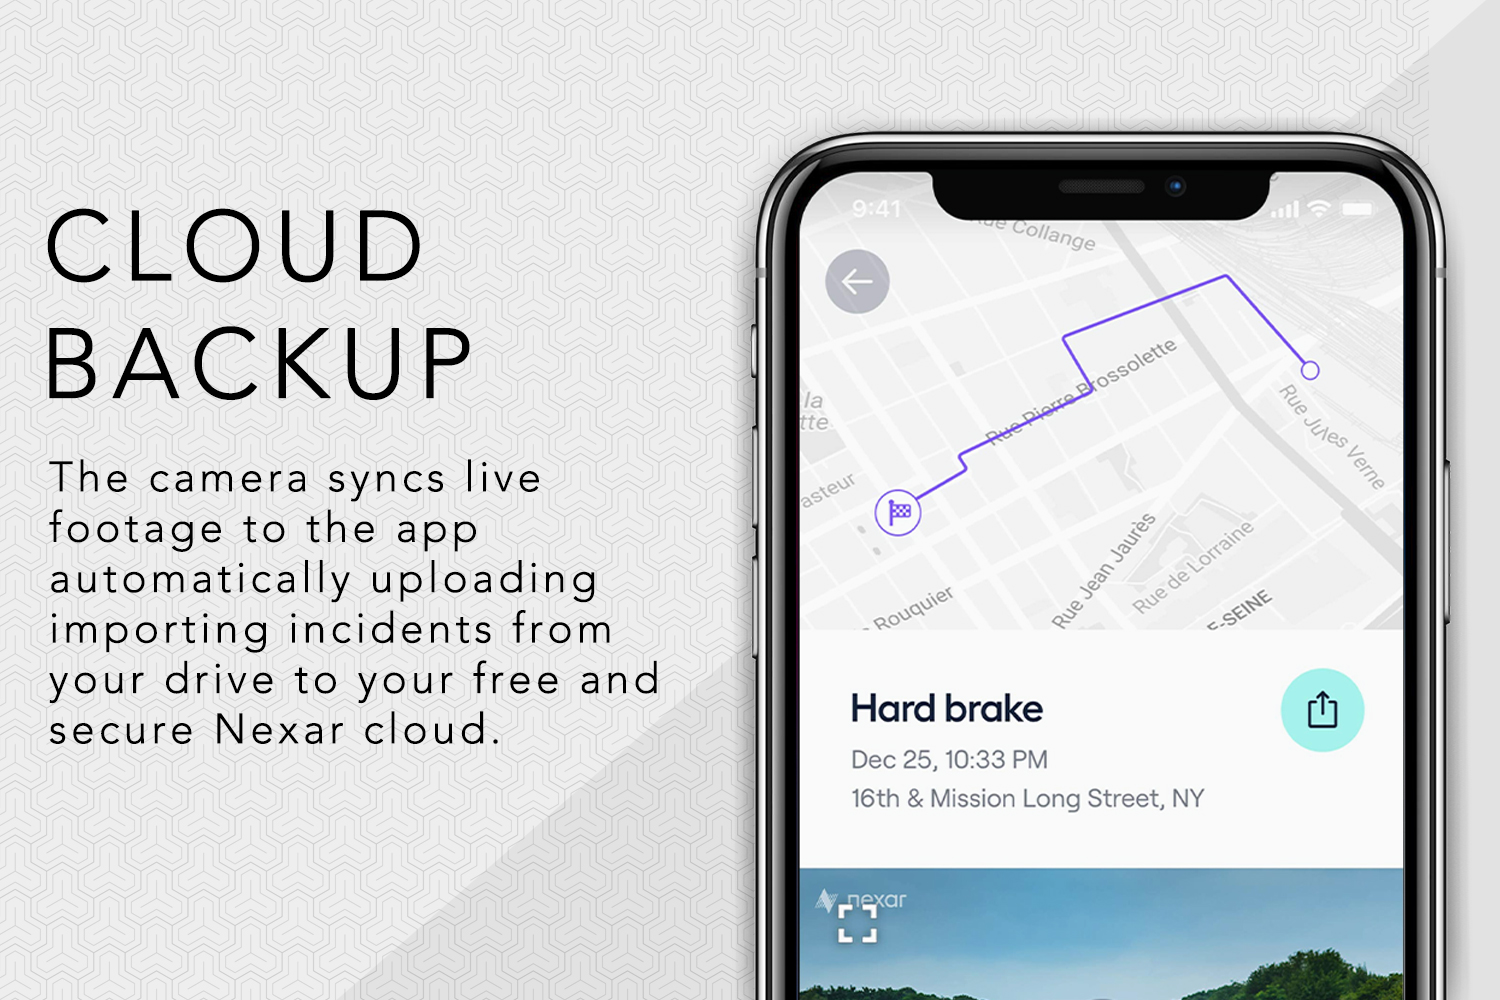 Cloud Backup, The camera syncs live footage to the app automatically uploading important incidents from your drive to your free and secure Nexar cloud.